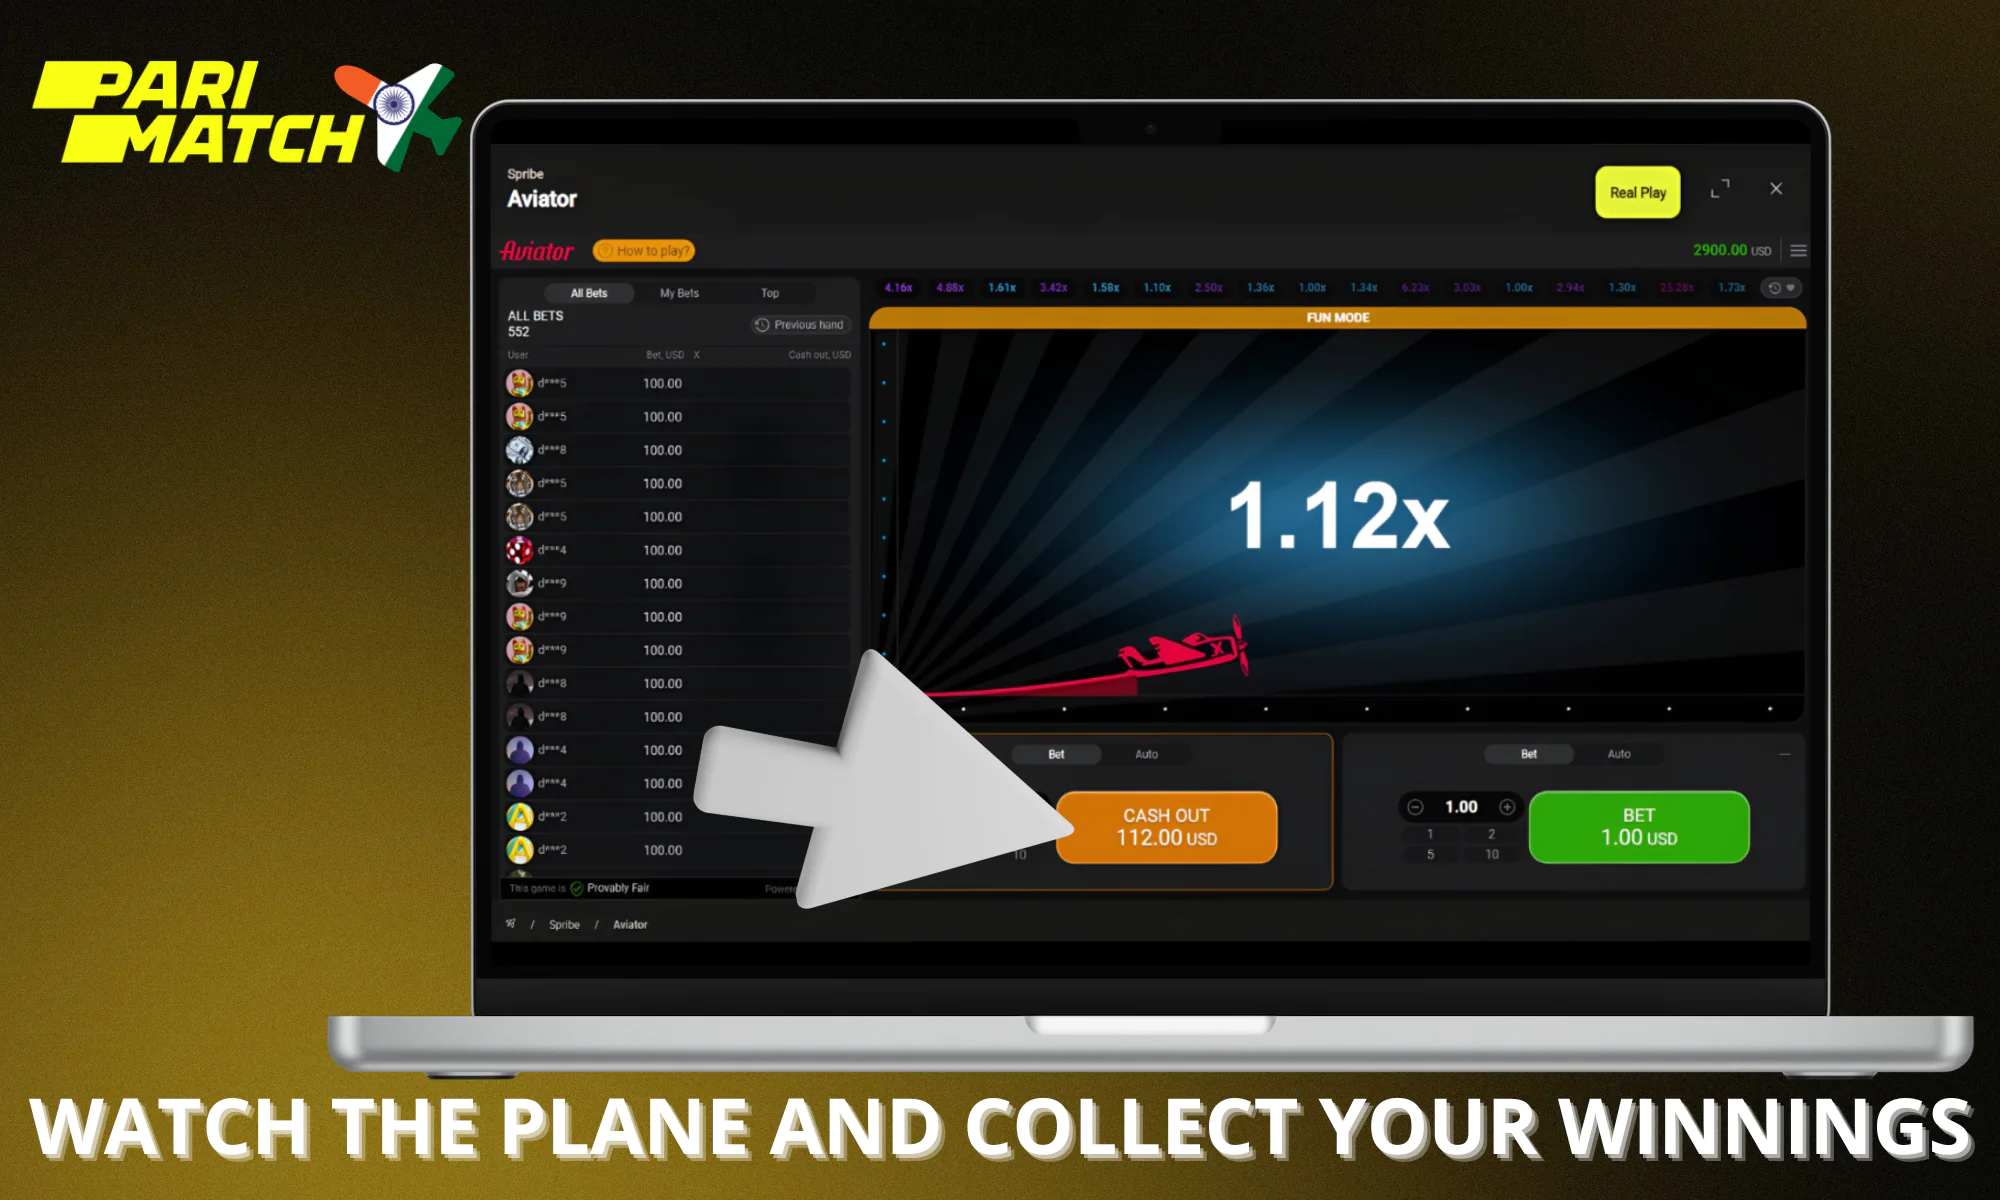 Watch the plane and collect your winnings on time